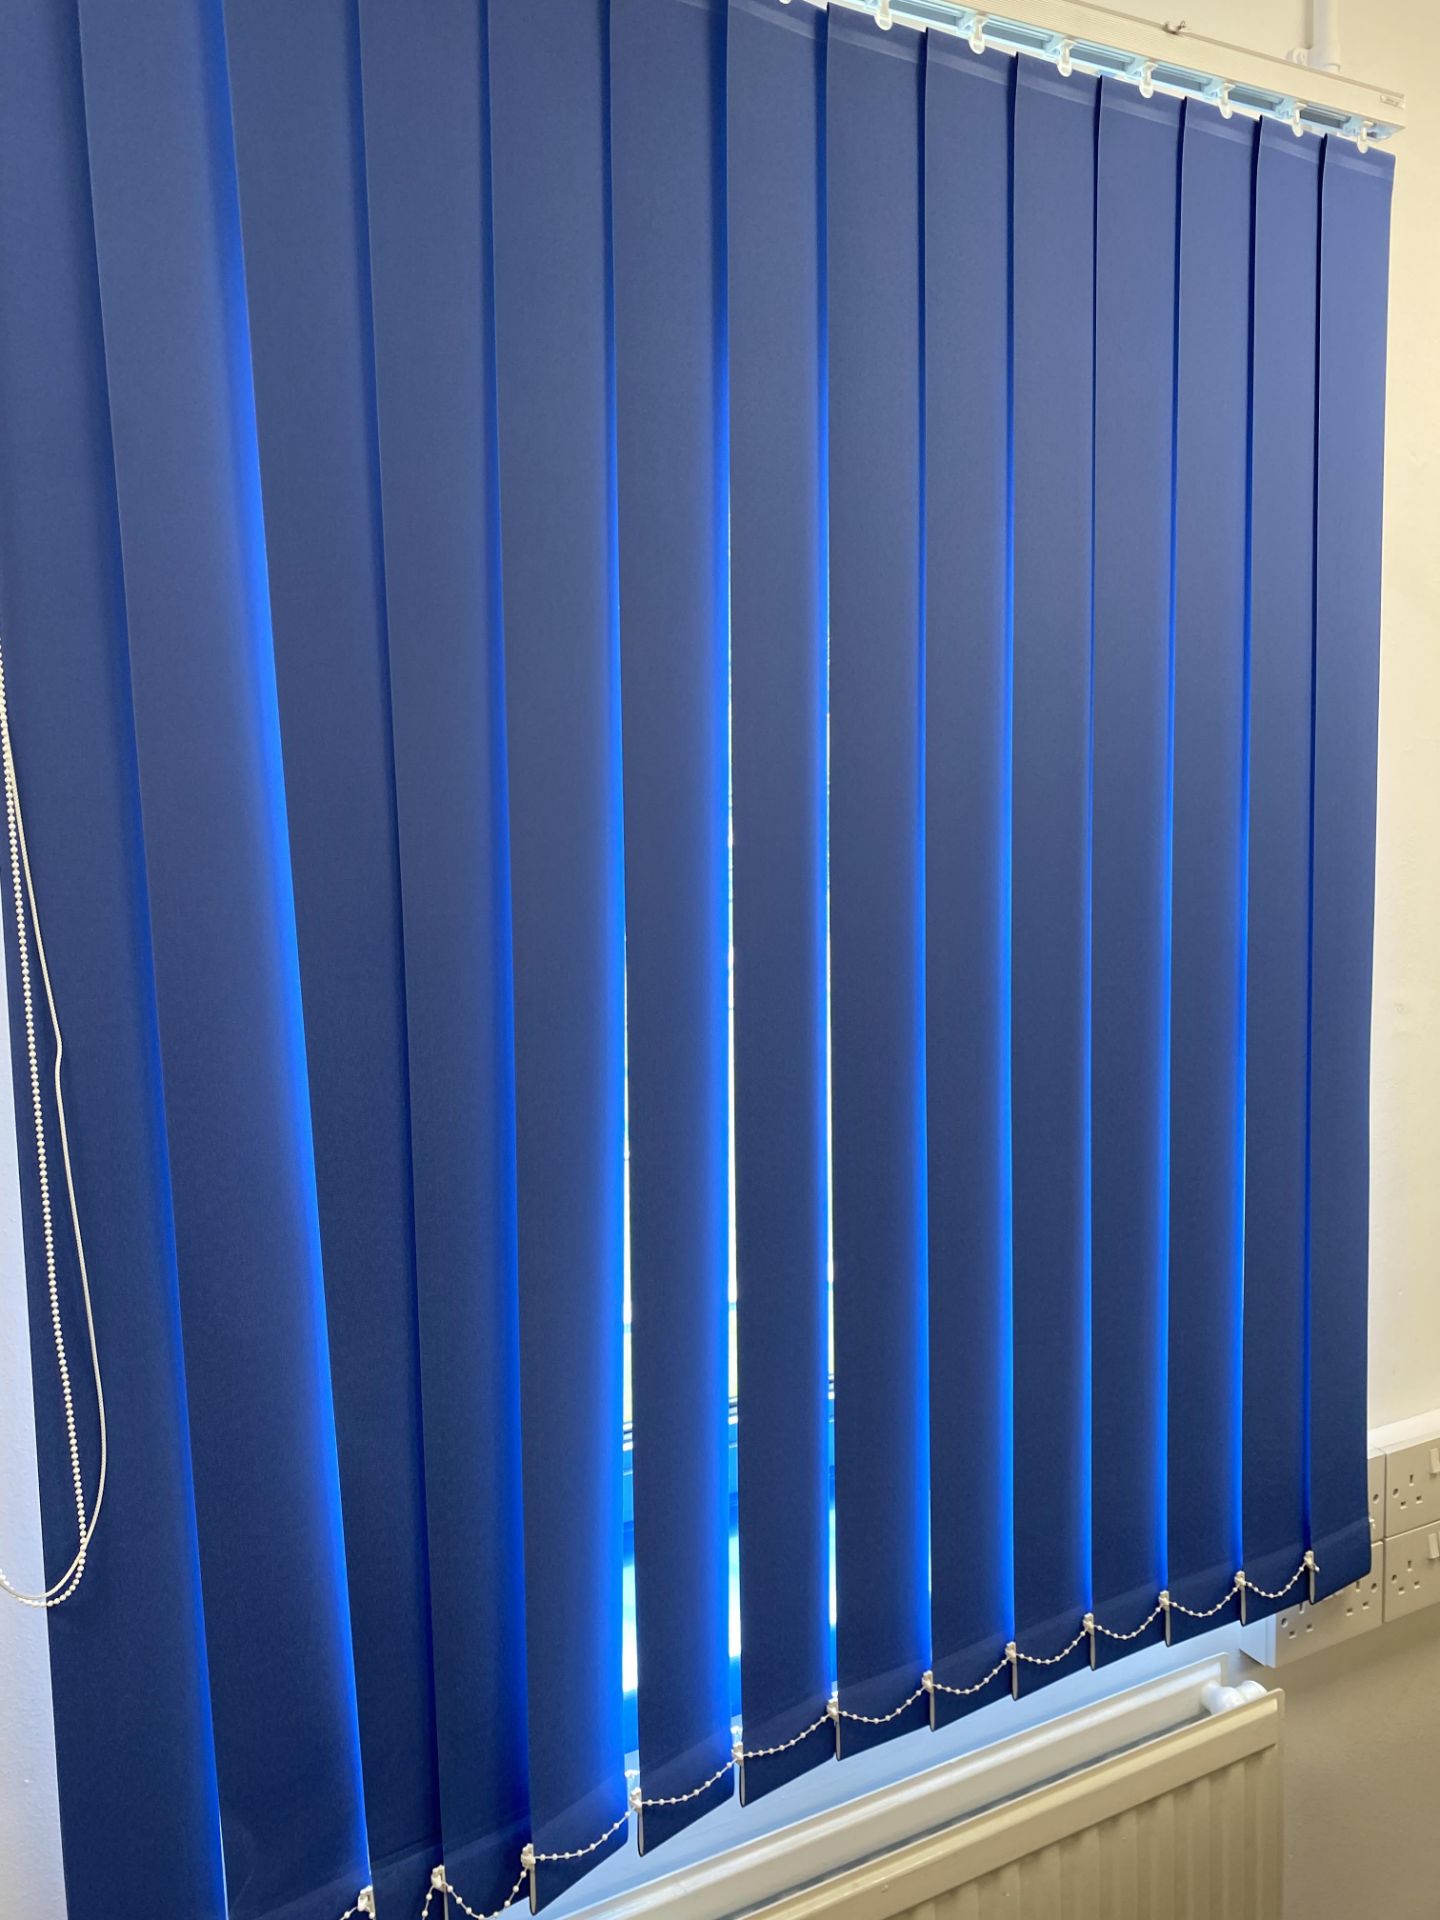 4 X Blue Vertical Blind For Window 90Cm Wide X 120Cm High - Image 2 of 3